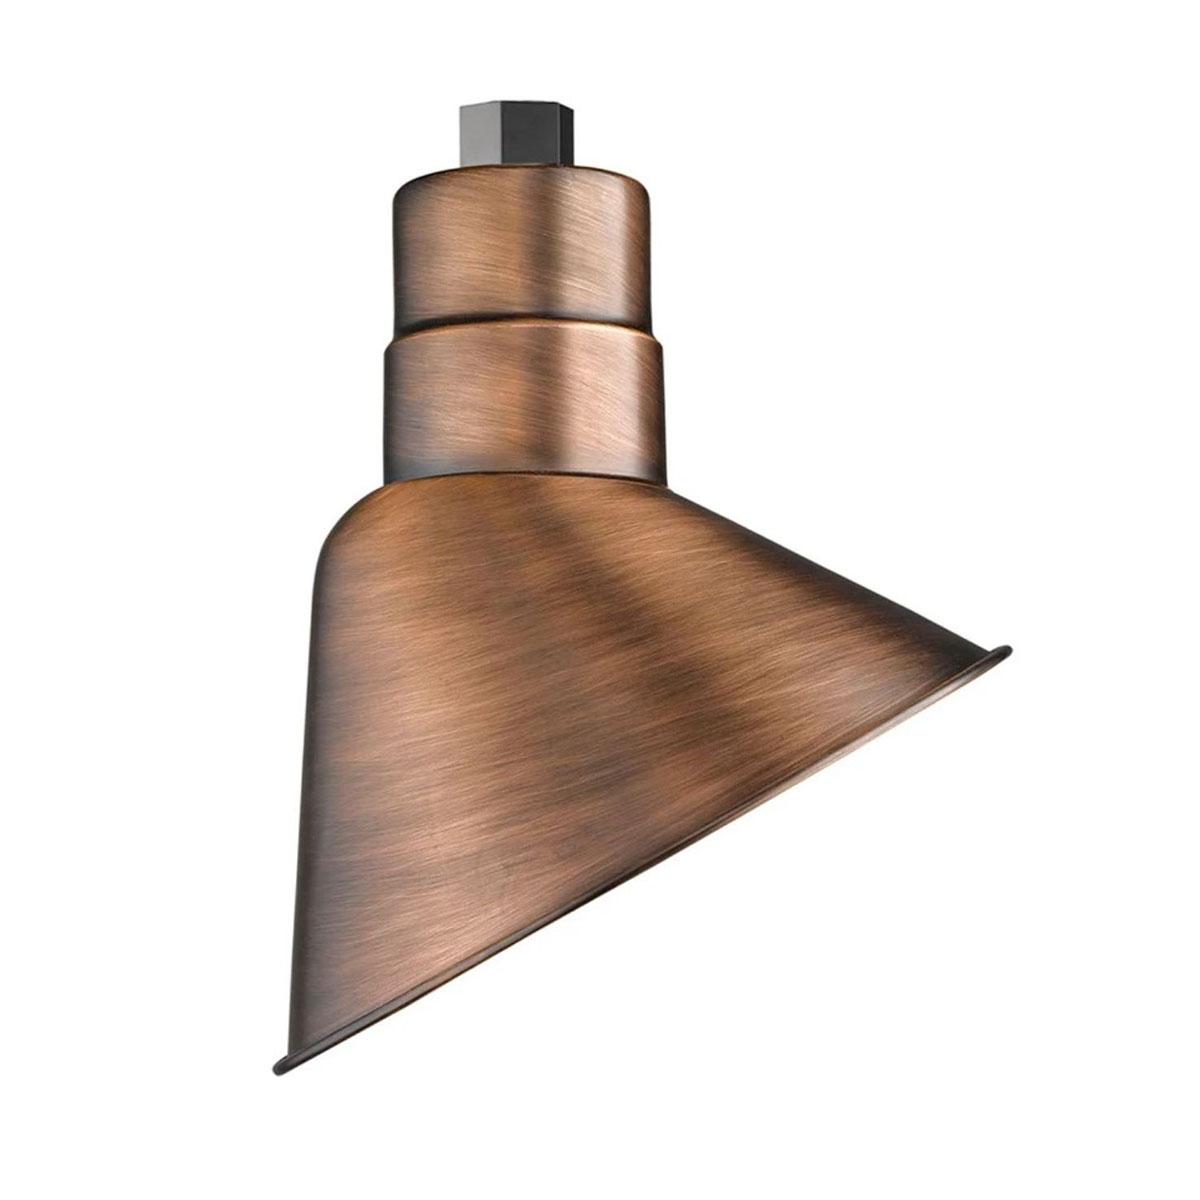 R series 10 In. Outdoor Angle Shade with 3/4 In. Fitter - Bees Lighting